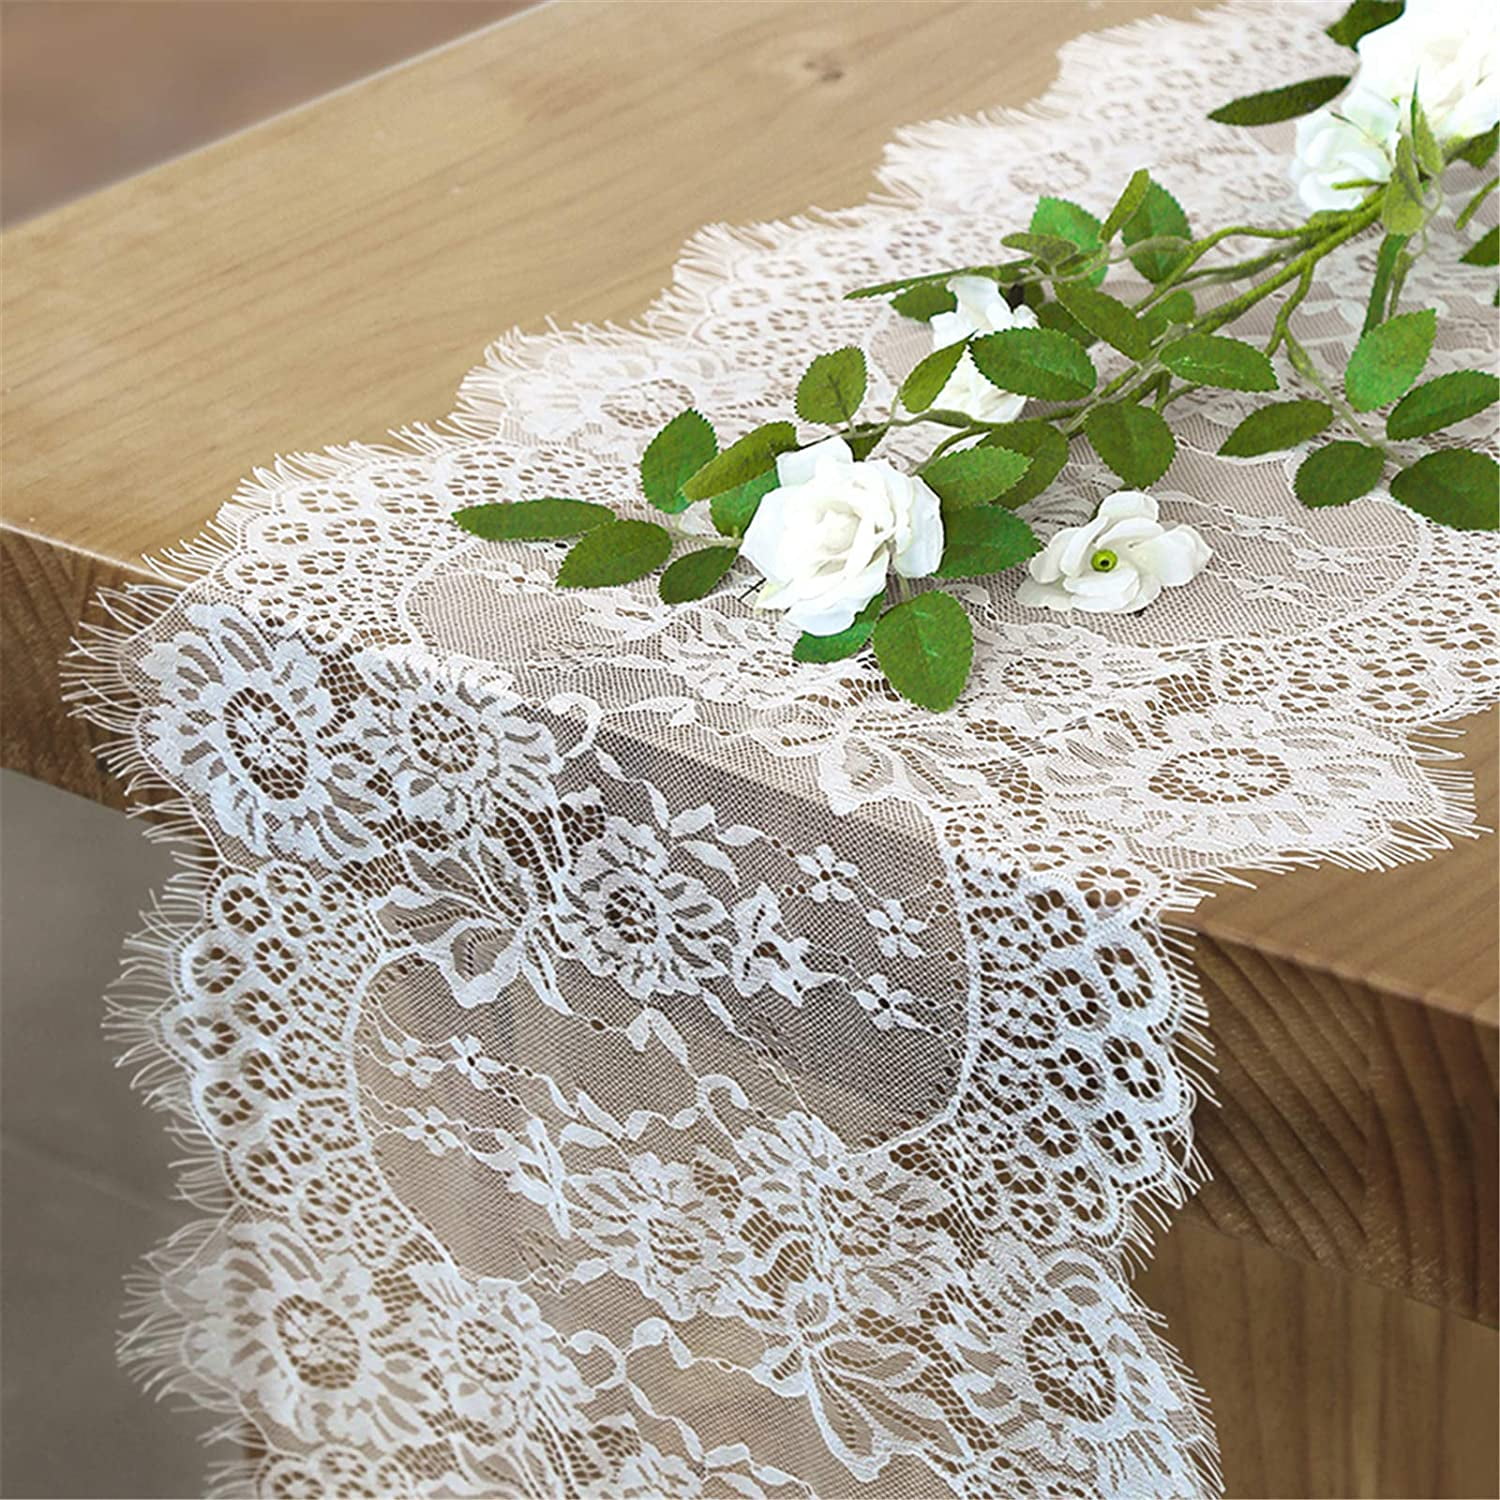 White Lace Rose Table Runner Doily Tabletopper  45" x 16" New Machine Wash 